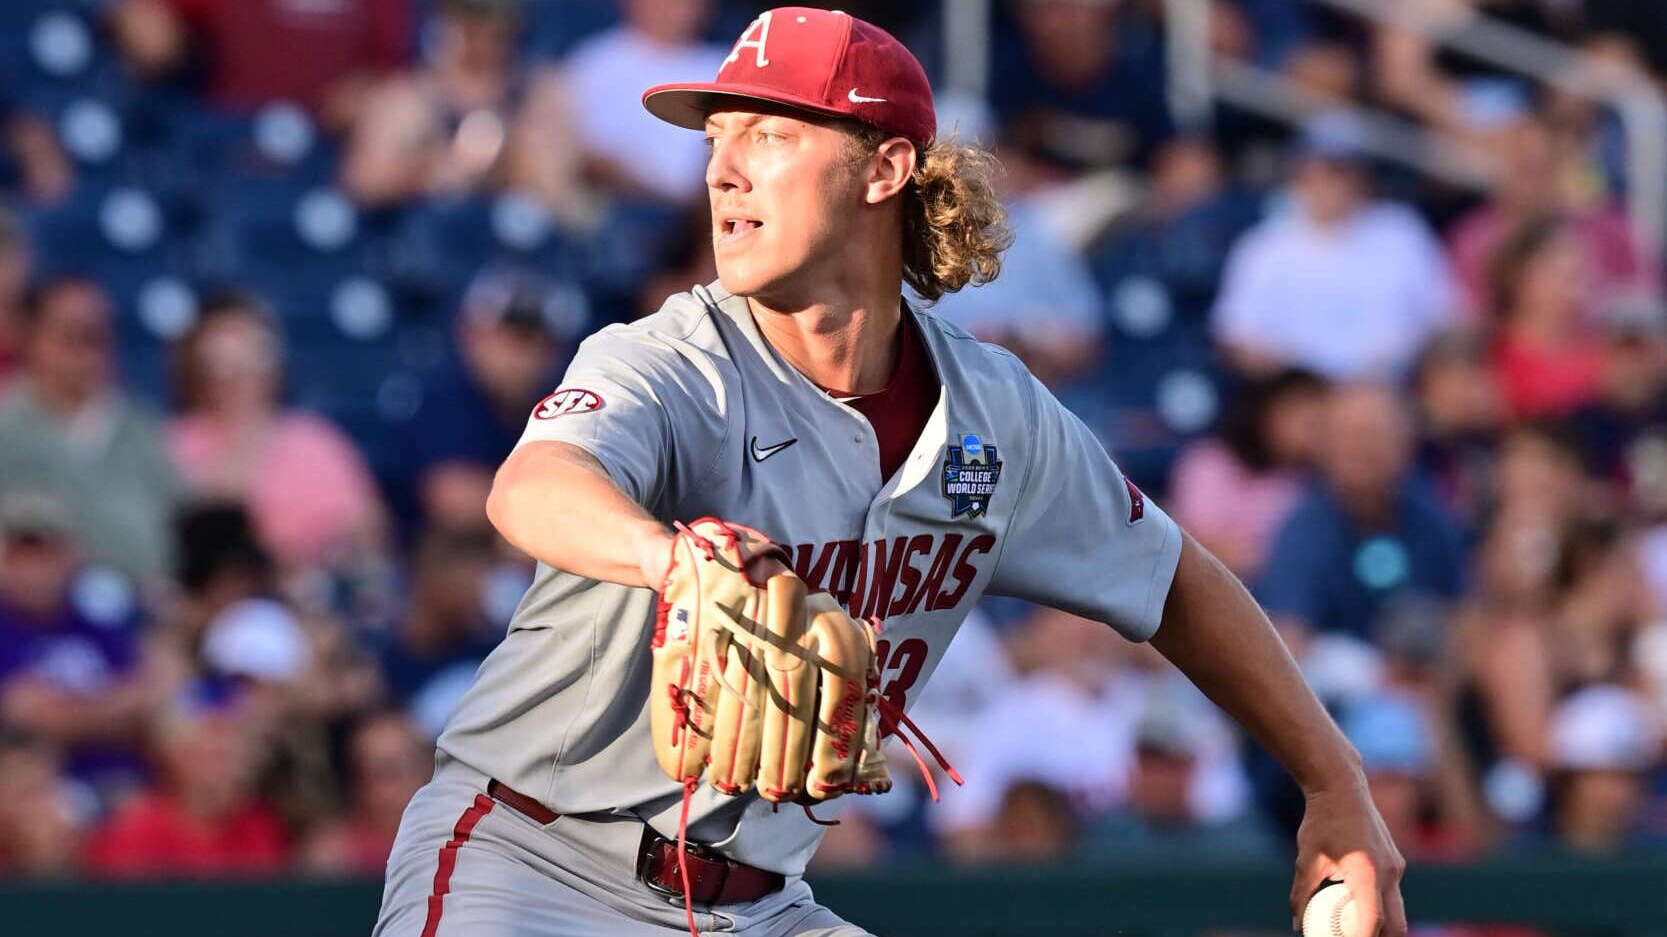 Hogs Survive, Play Rebels in Decisive Game at 3 p.m. Tomorrow